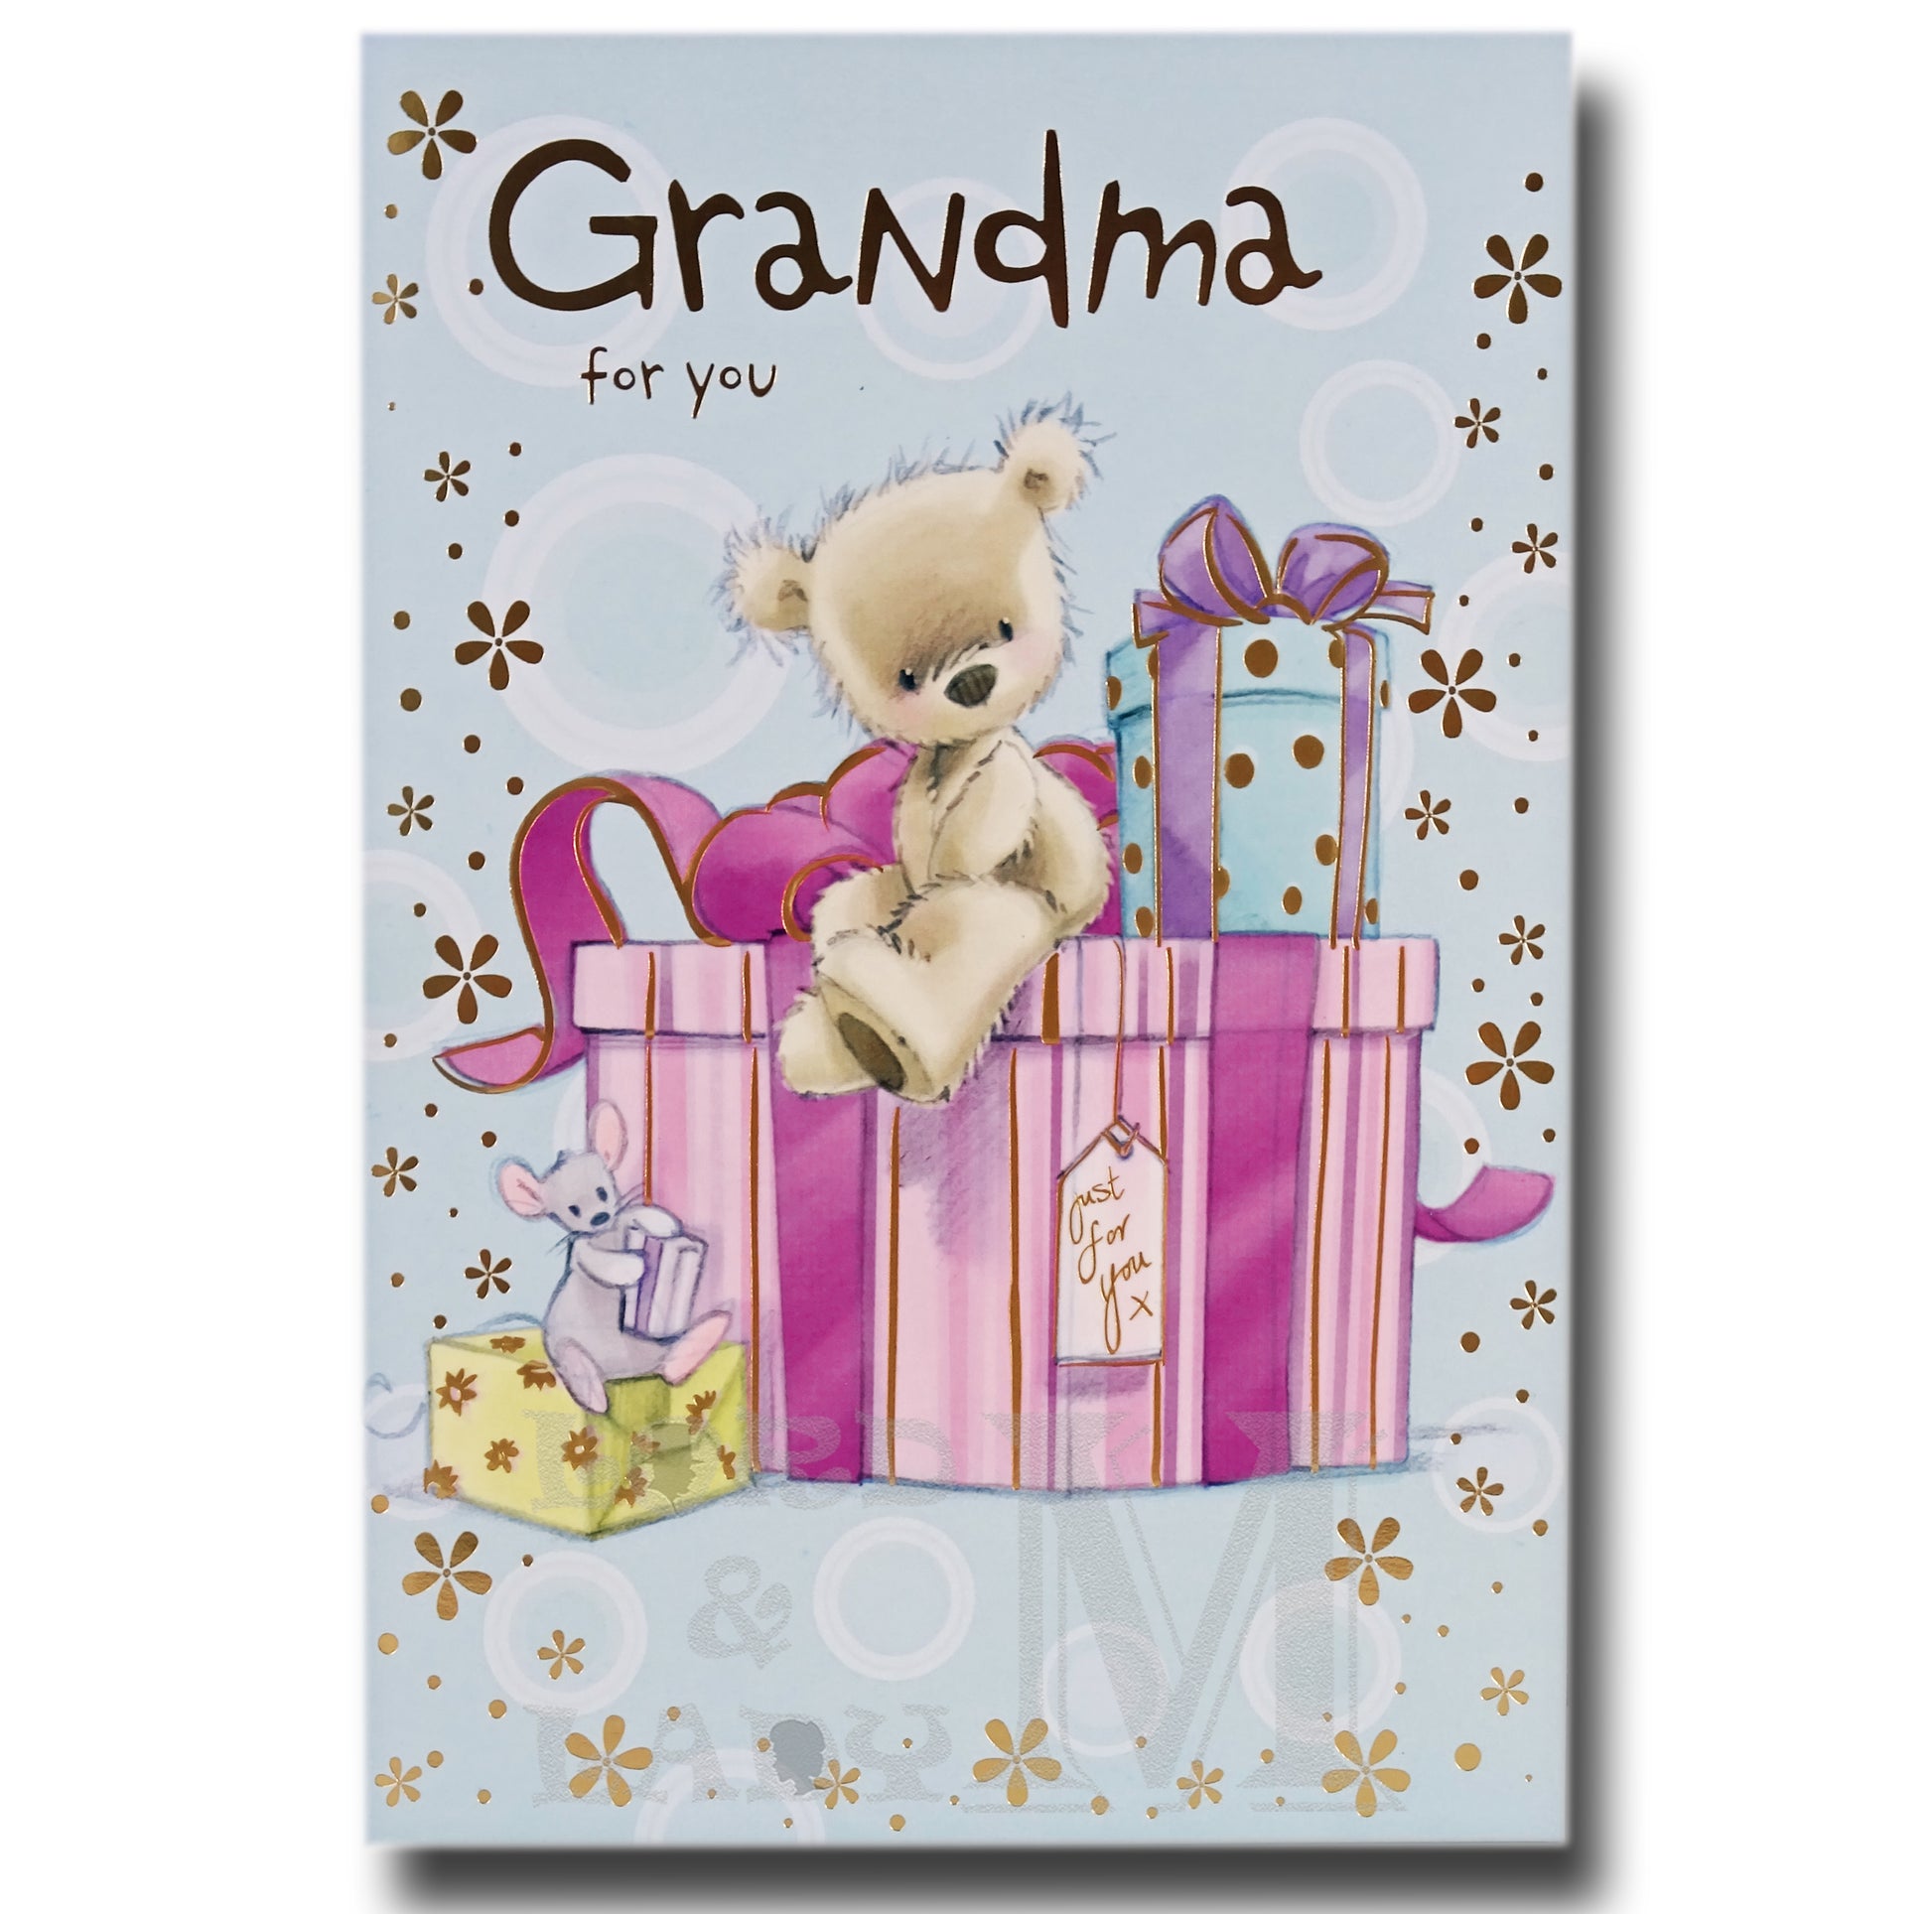 23cm - Grandma For You - Bear Mouse Gifts - E